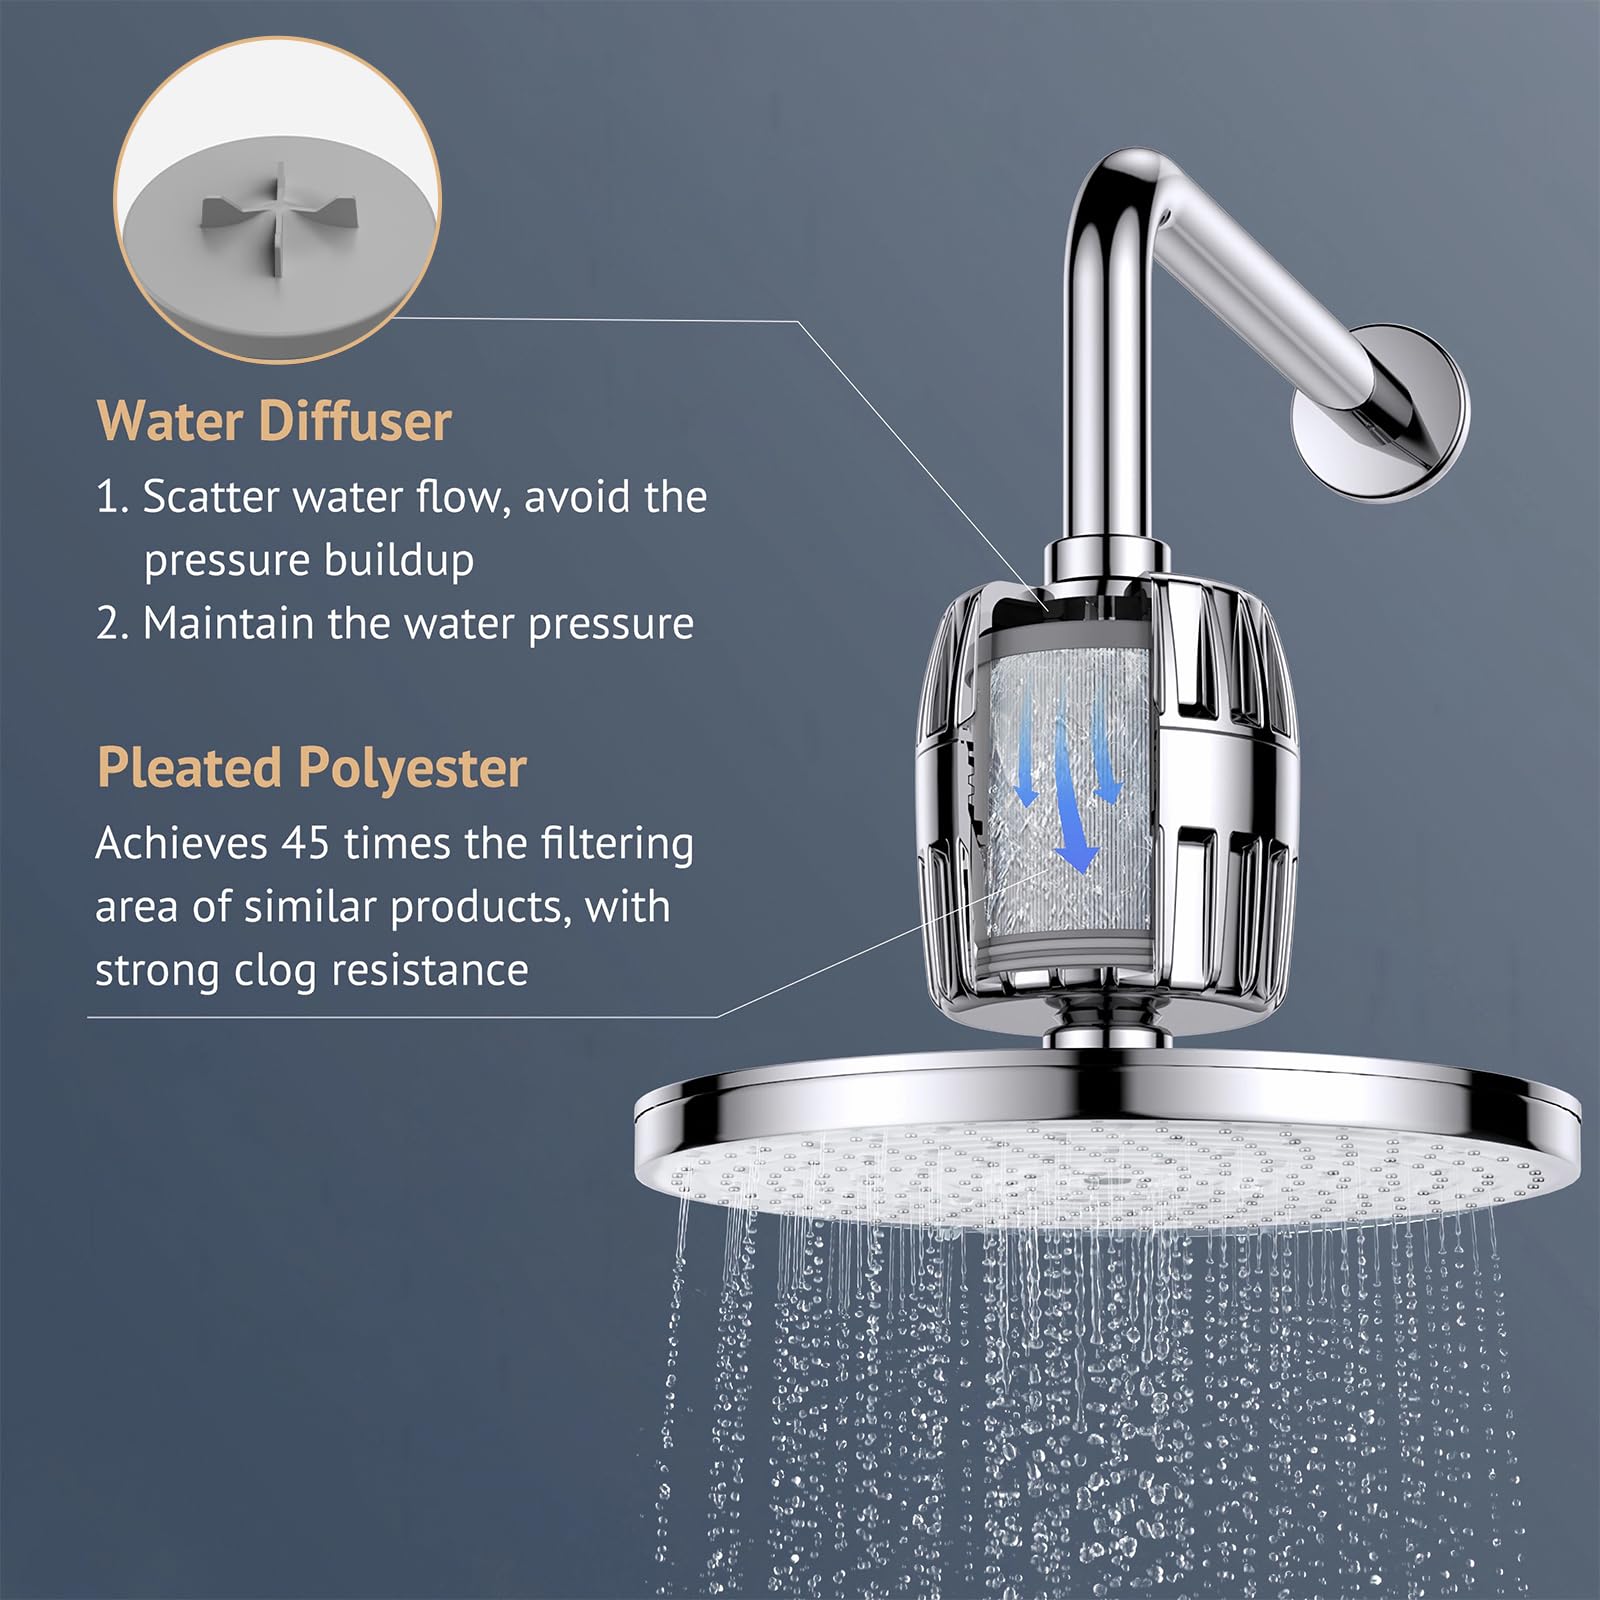 Kintim Shower Filter for Hard Water Features Full Pressure, Clog-Proof Shower Water Filter with 304 Stainless Threads, Removes Chlorine and Fluoride, Revitalize Dry, Itchy Skin and Brittle Hair